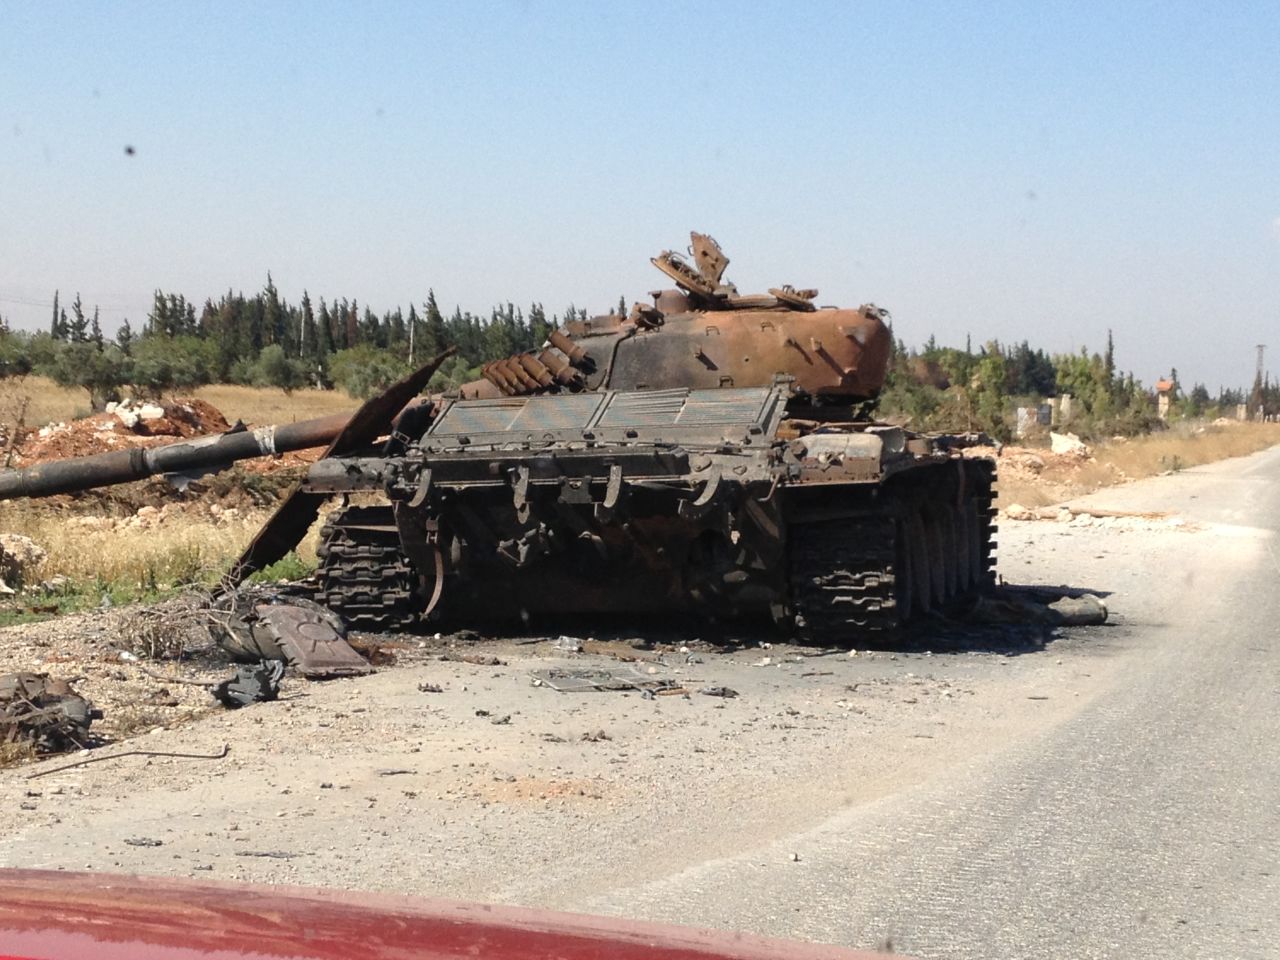 A destroyed tank is pictured at the entrance to the city.